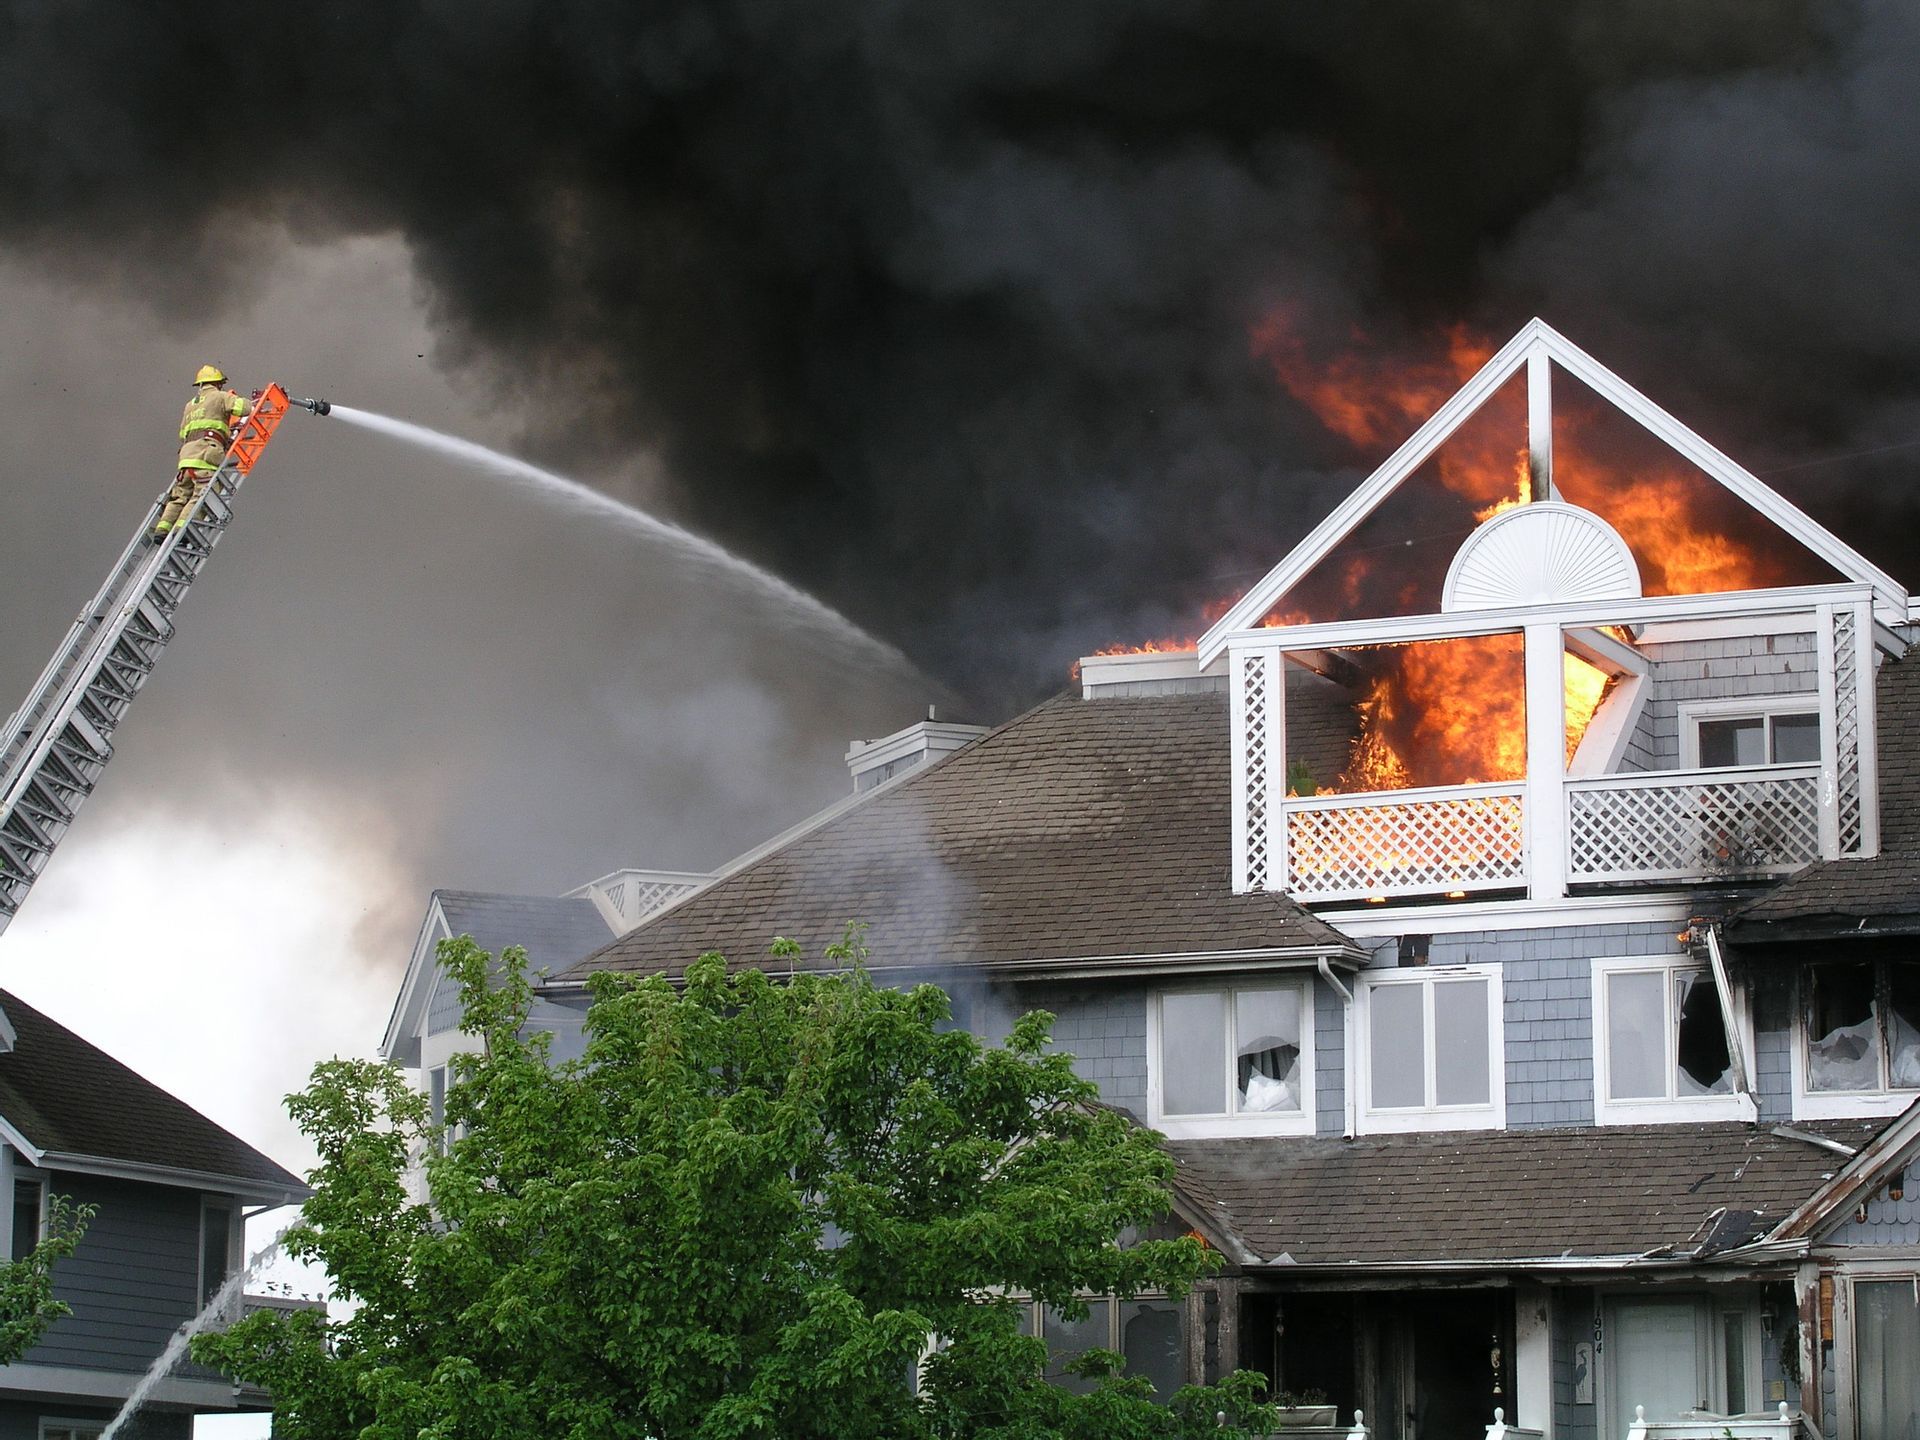 Property Claims/Fire Loss/Subrogated